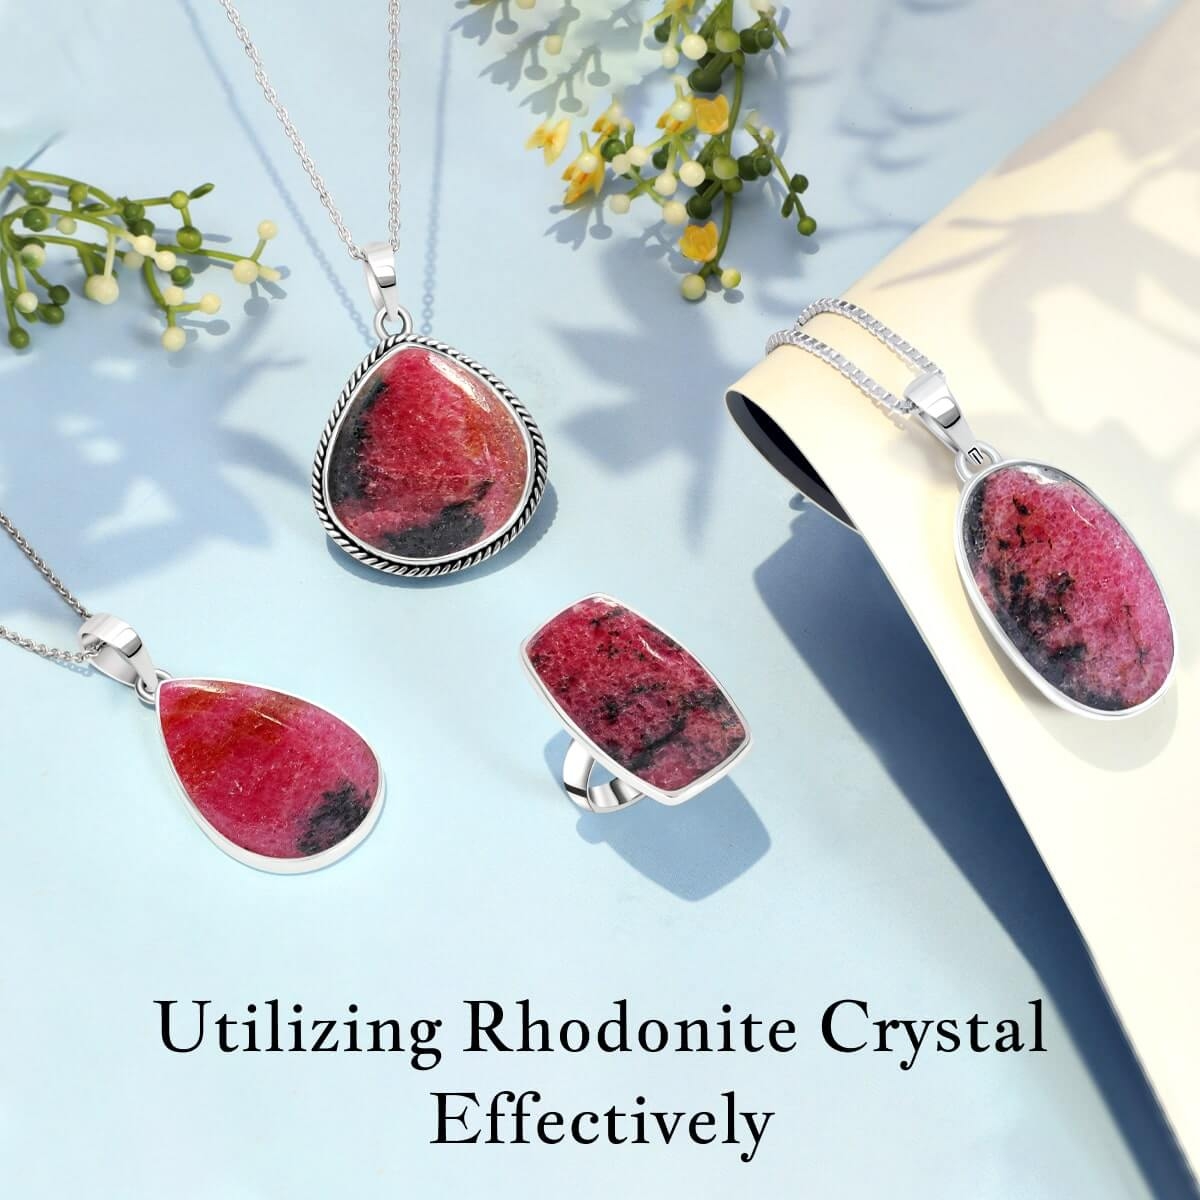 How to use Rhodonite